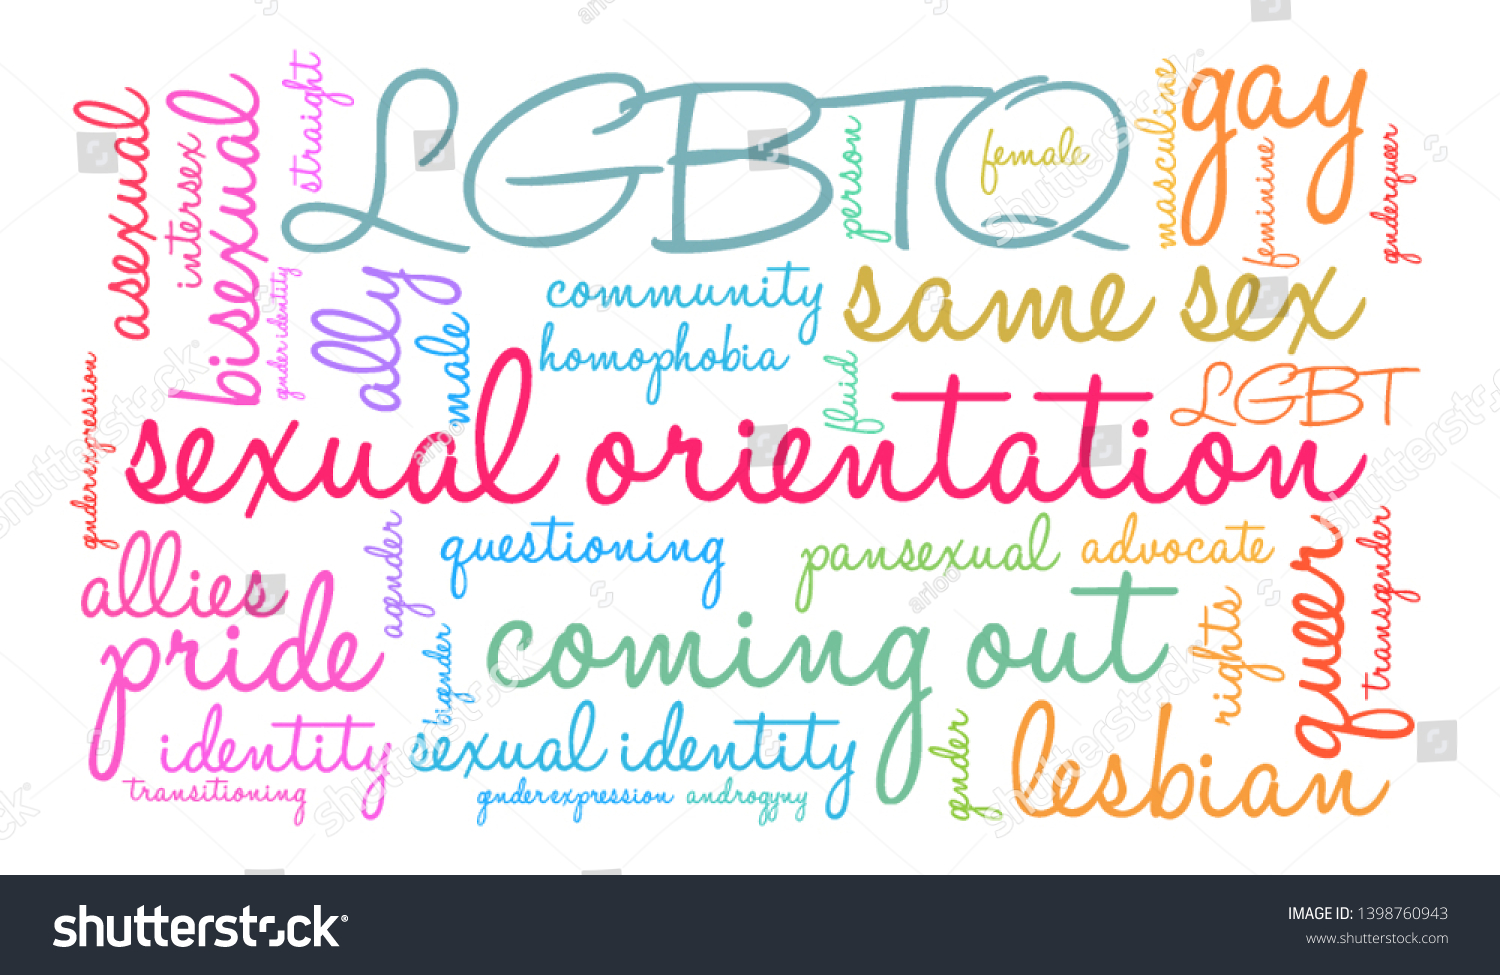 Sexual Orientation Word Cloud On White Stock Vector Royalty Free 1398760943 Shutterstock 6086